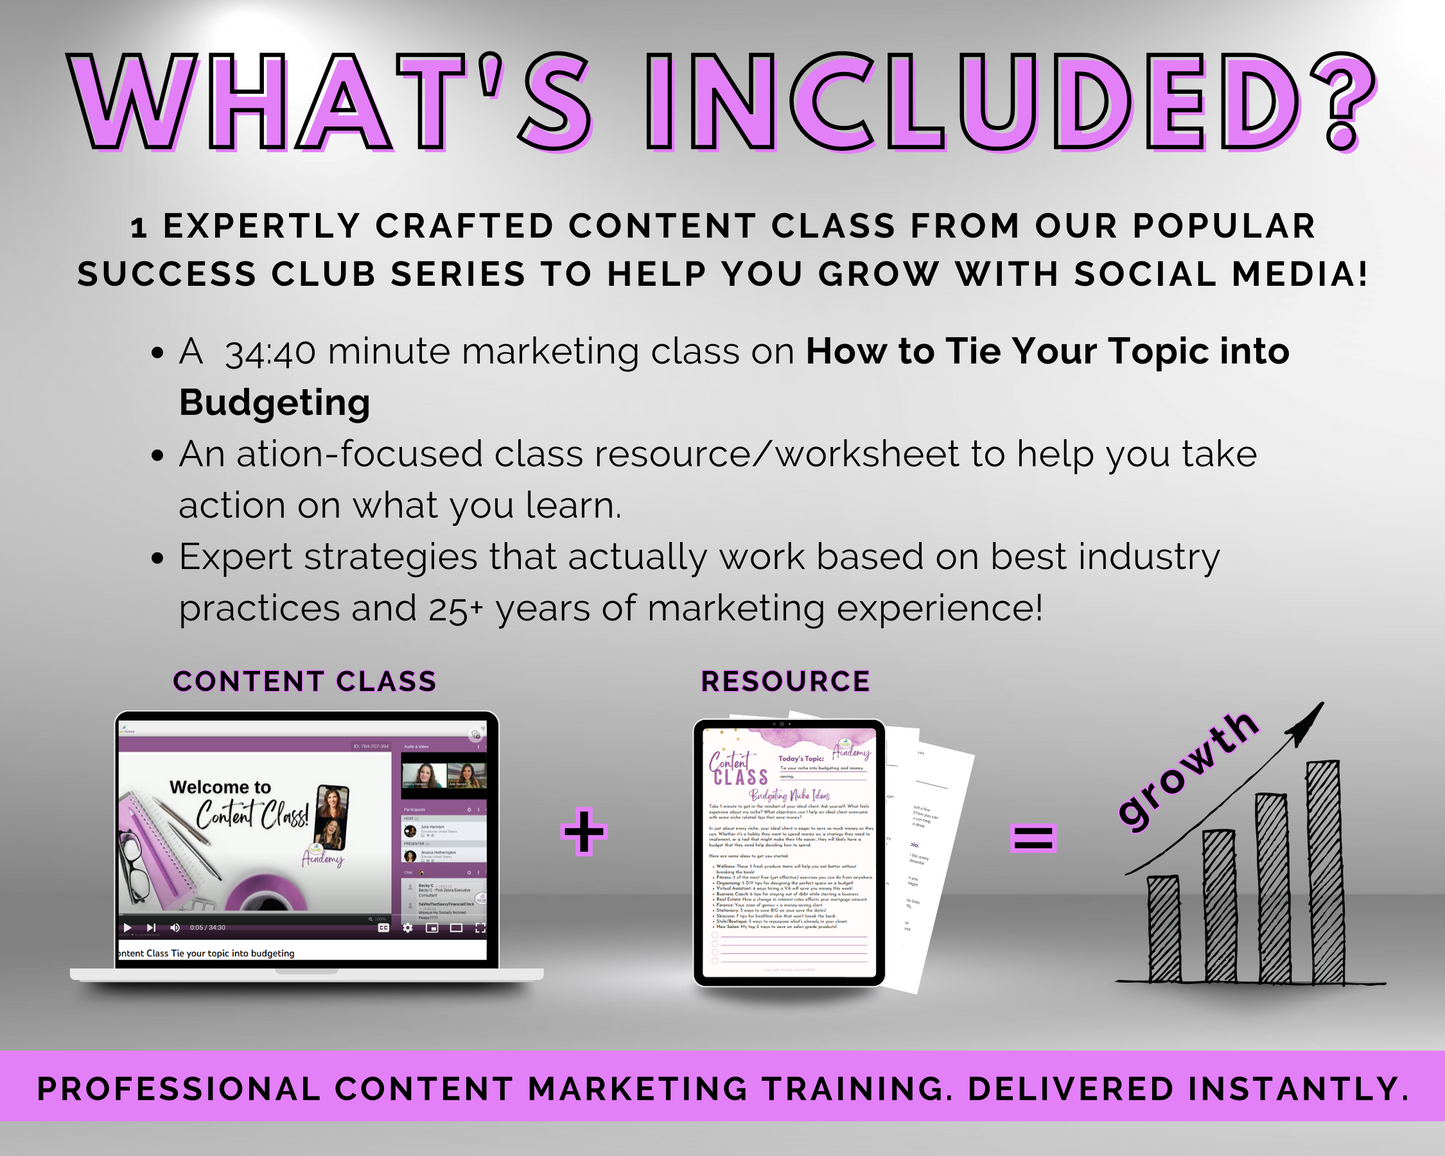 Content Class - How to Tie Your Topic into Budgeting Masterclass